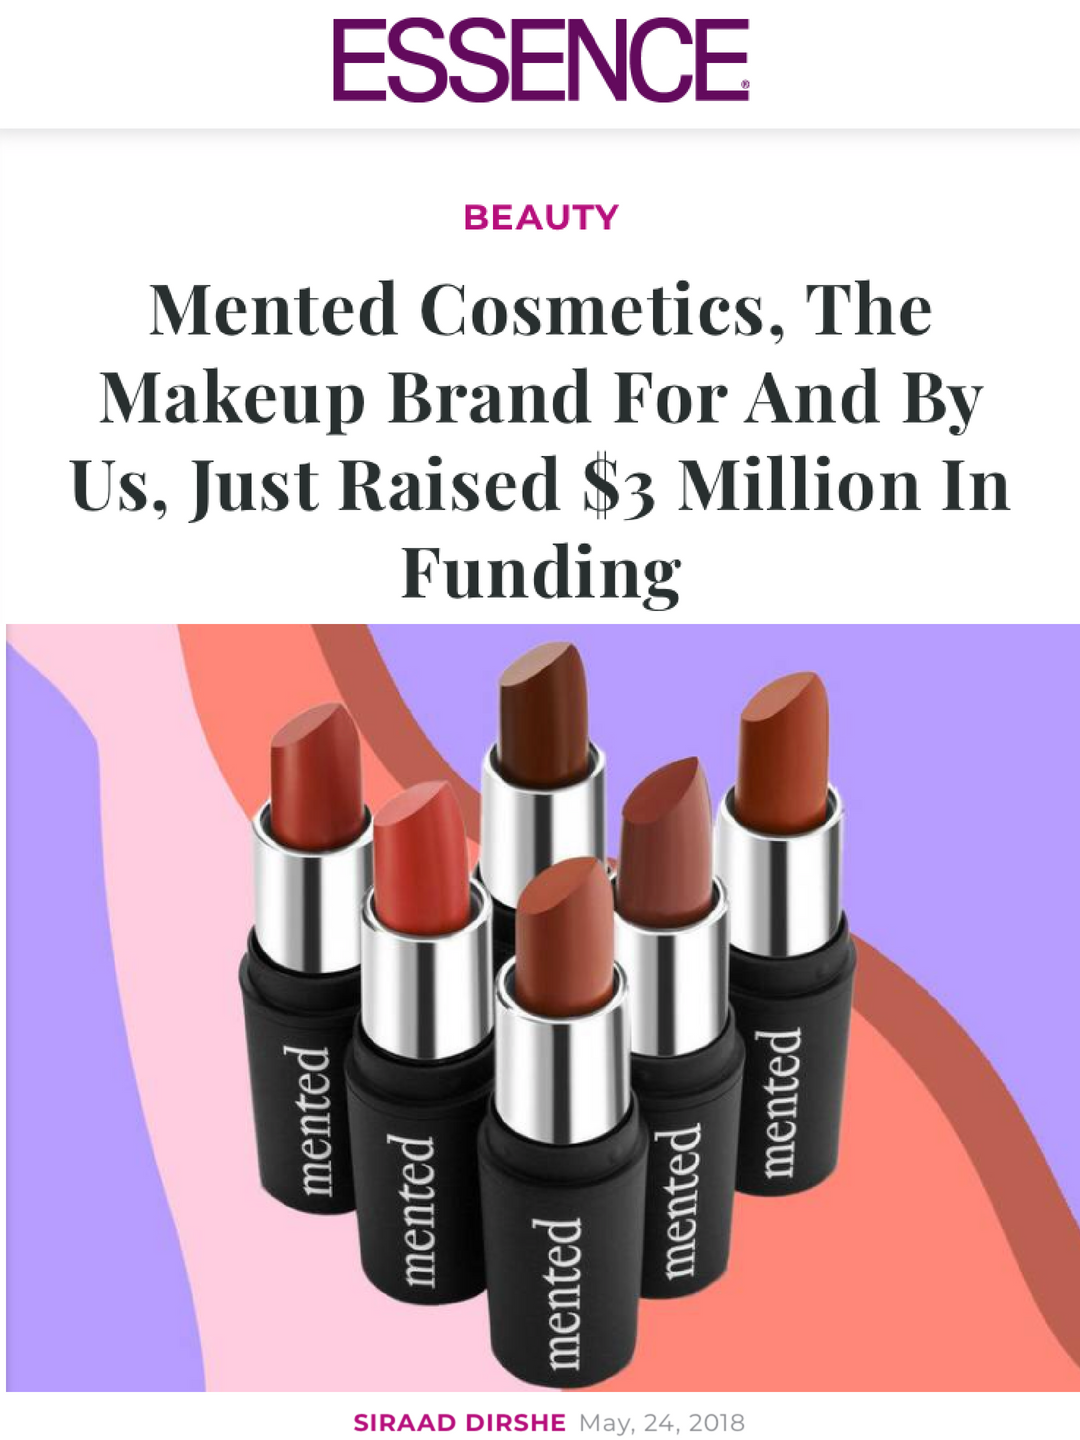 Mented Cosmetics, The Makeup Brand For And By Us, Just Raised $3 Million In Funding